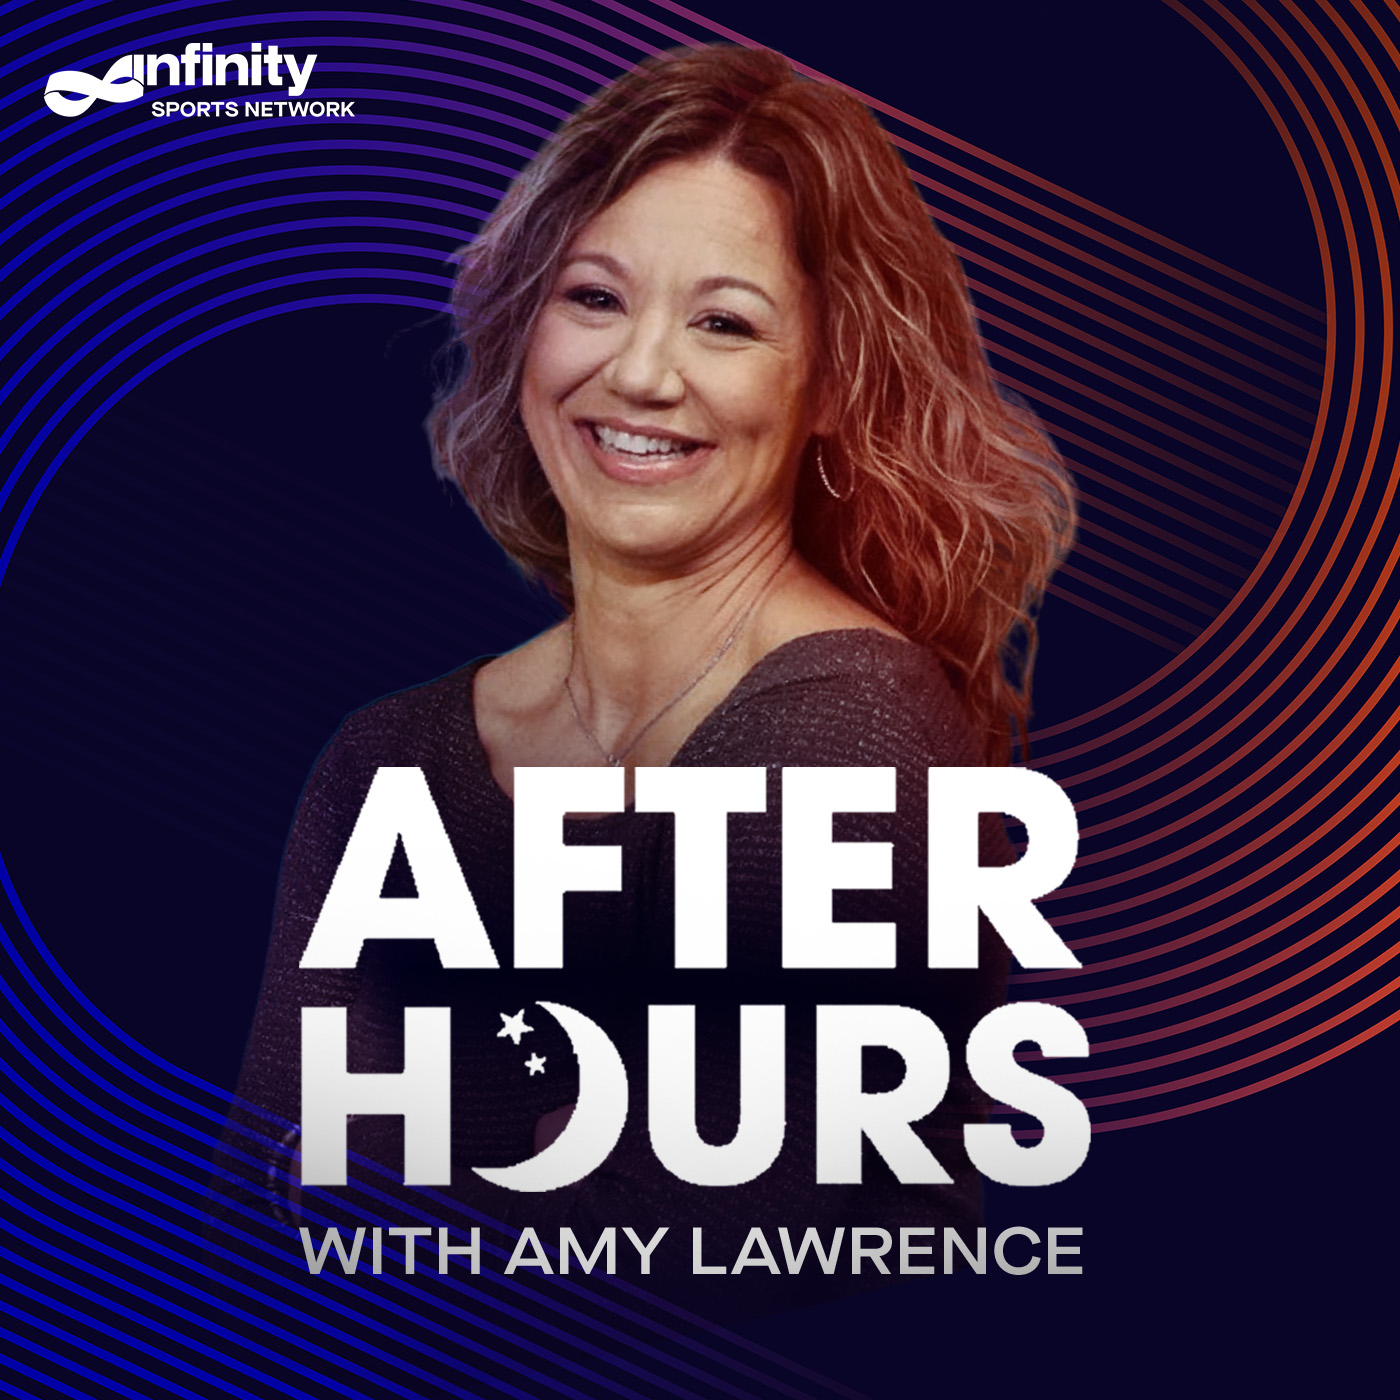 6/22/21 After Hours with Amy Lawrence PODCAST: Hour 2